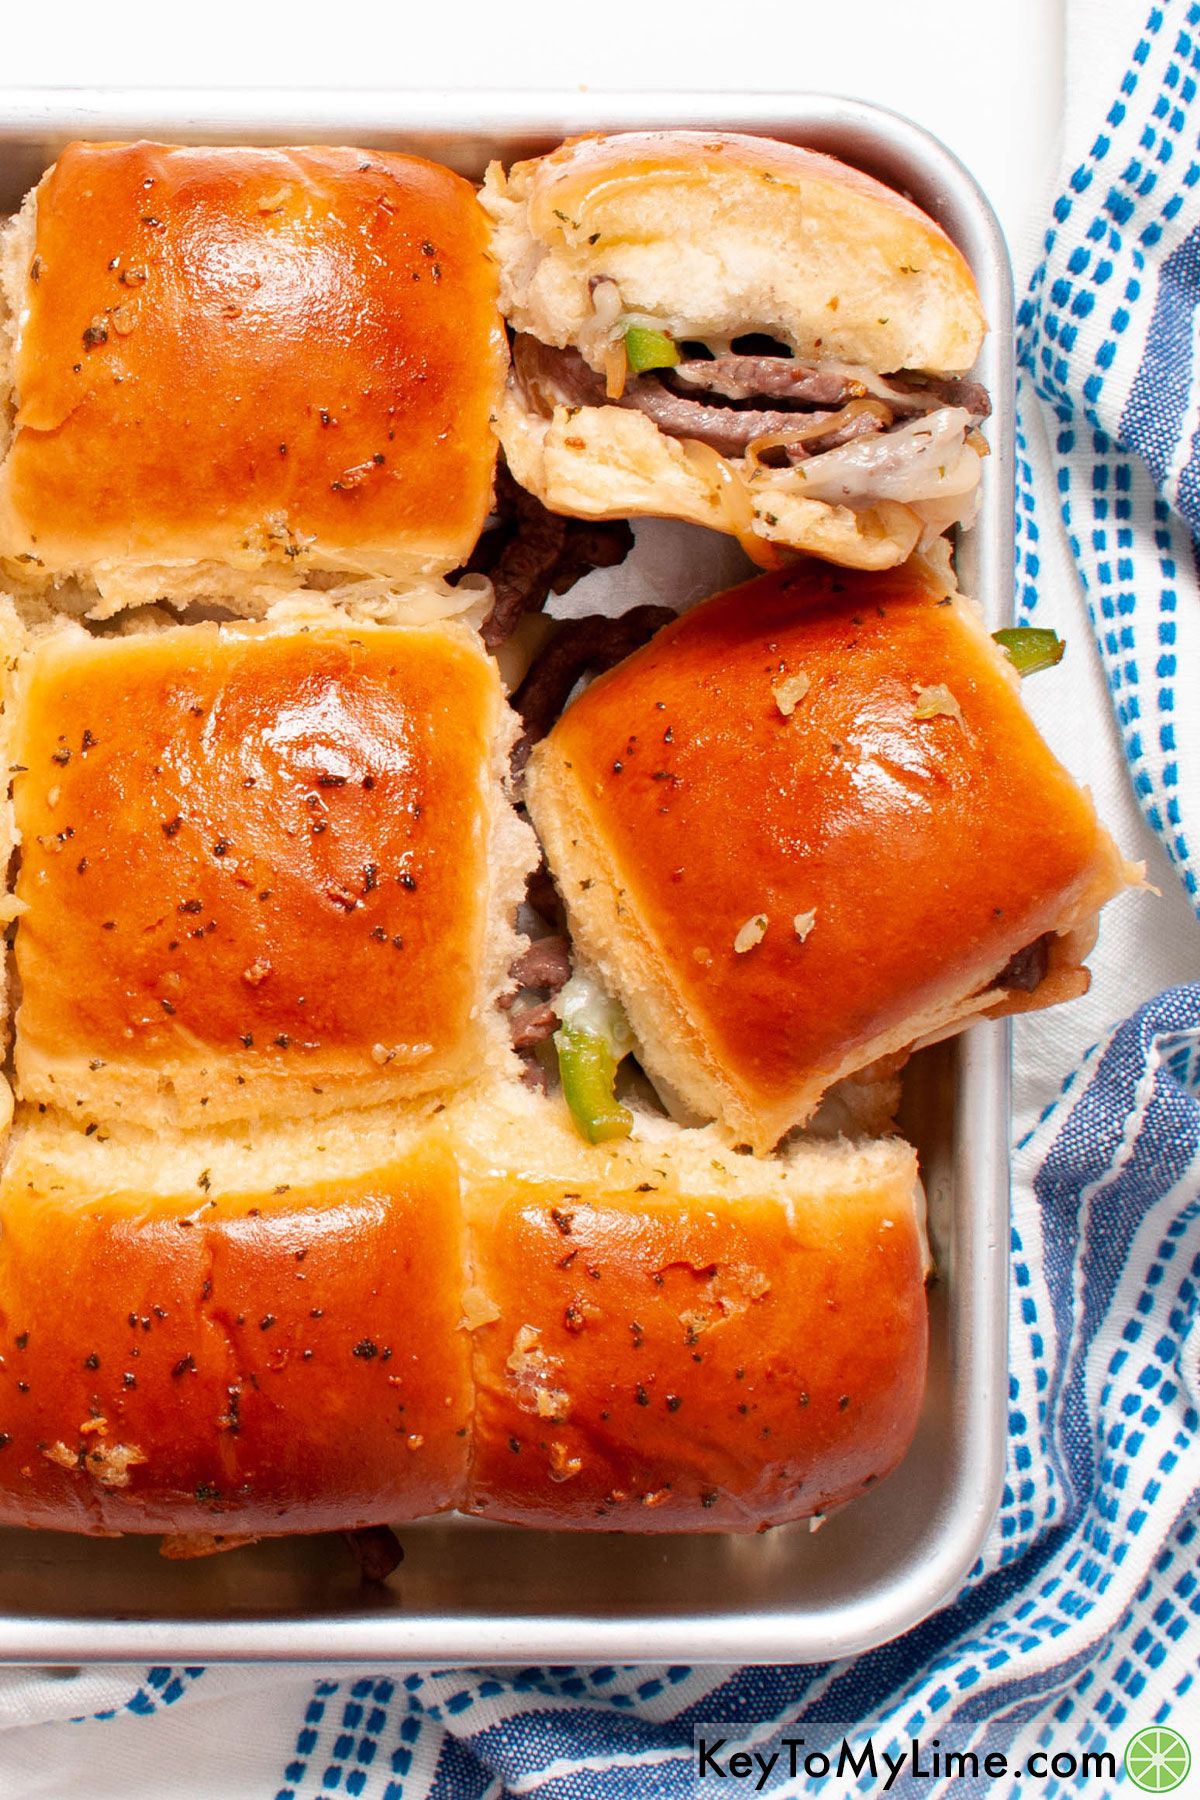 A tray of Philly cheesesteak sliders photographed on a blue striped napkin.